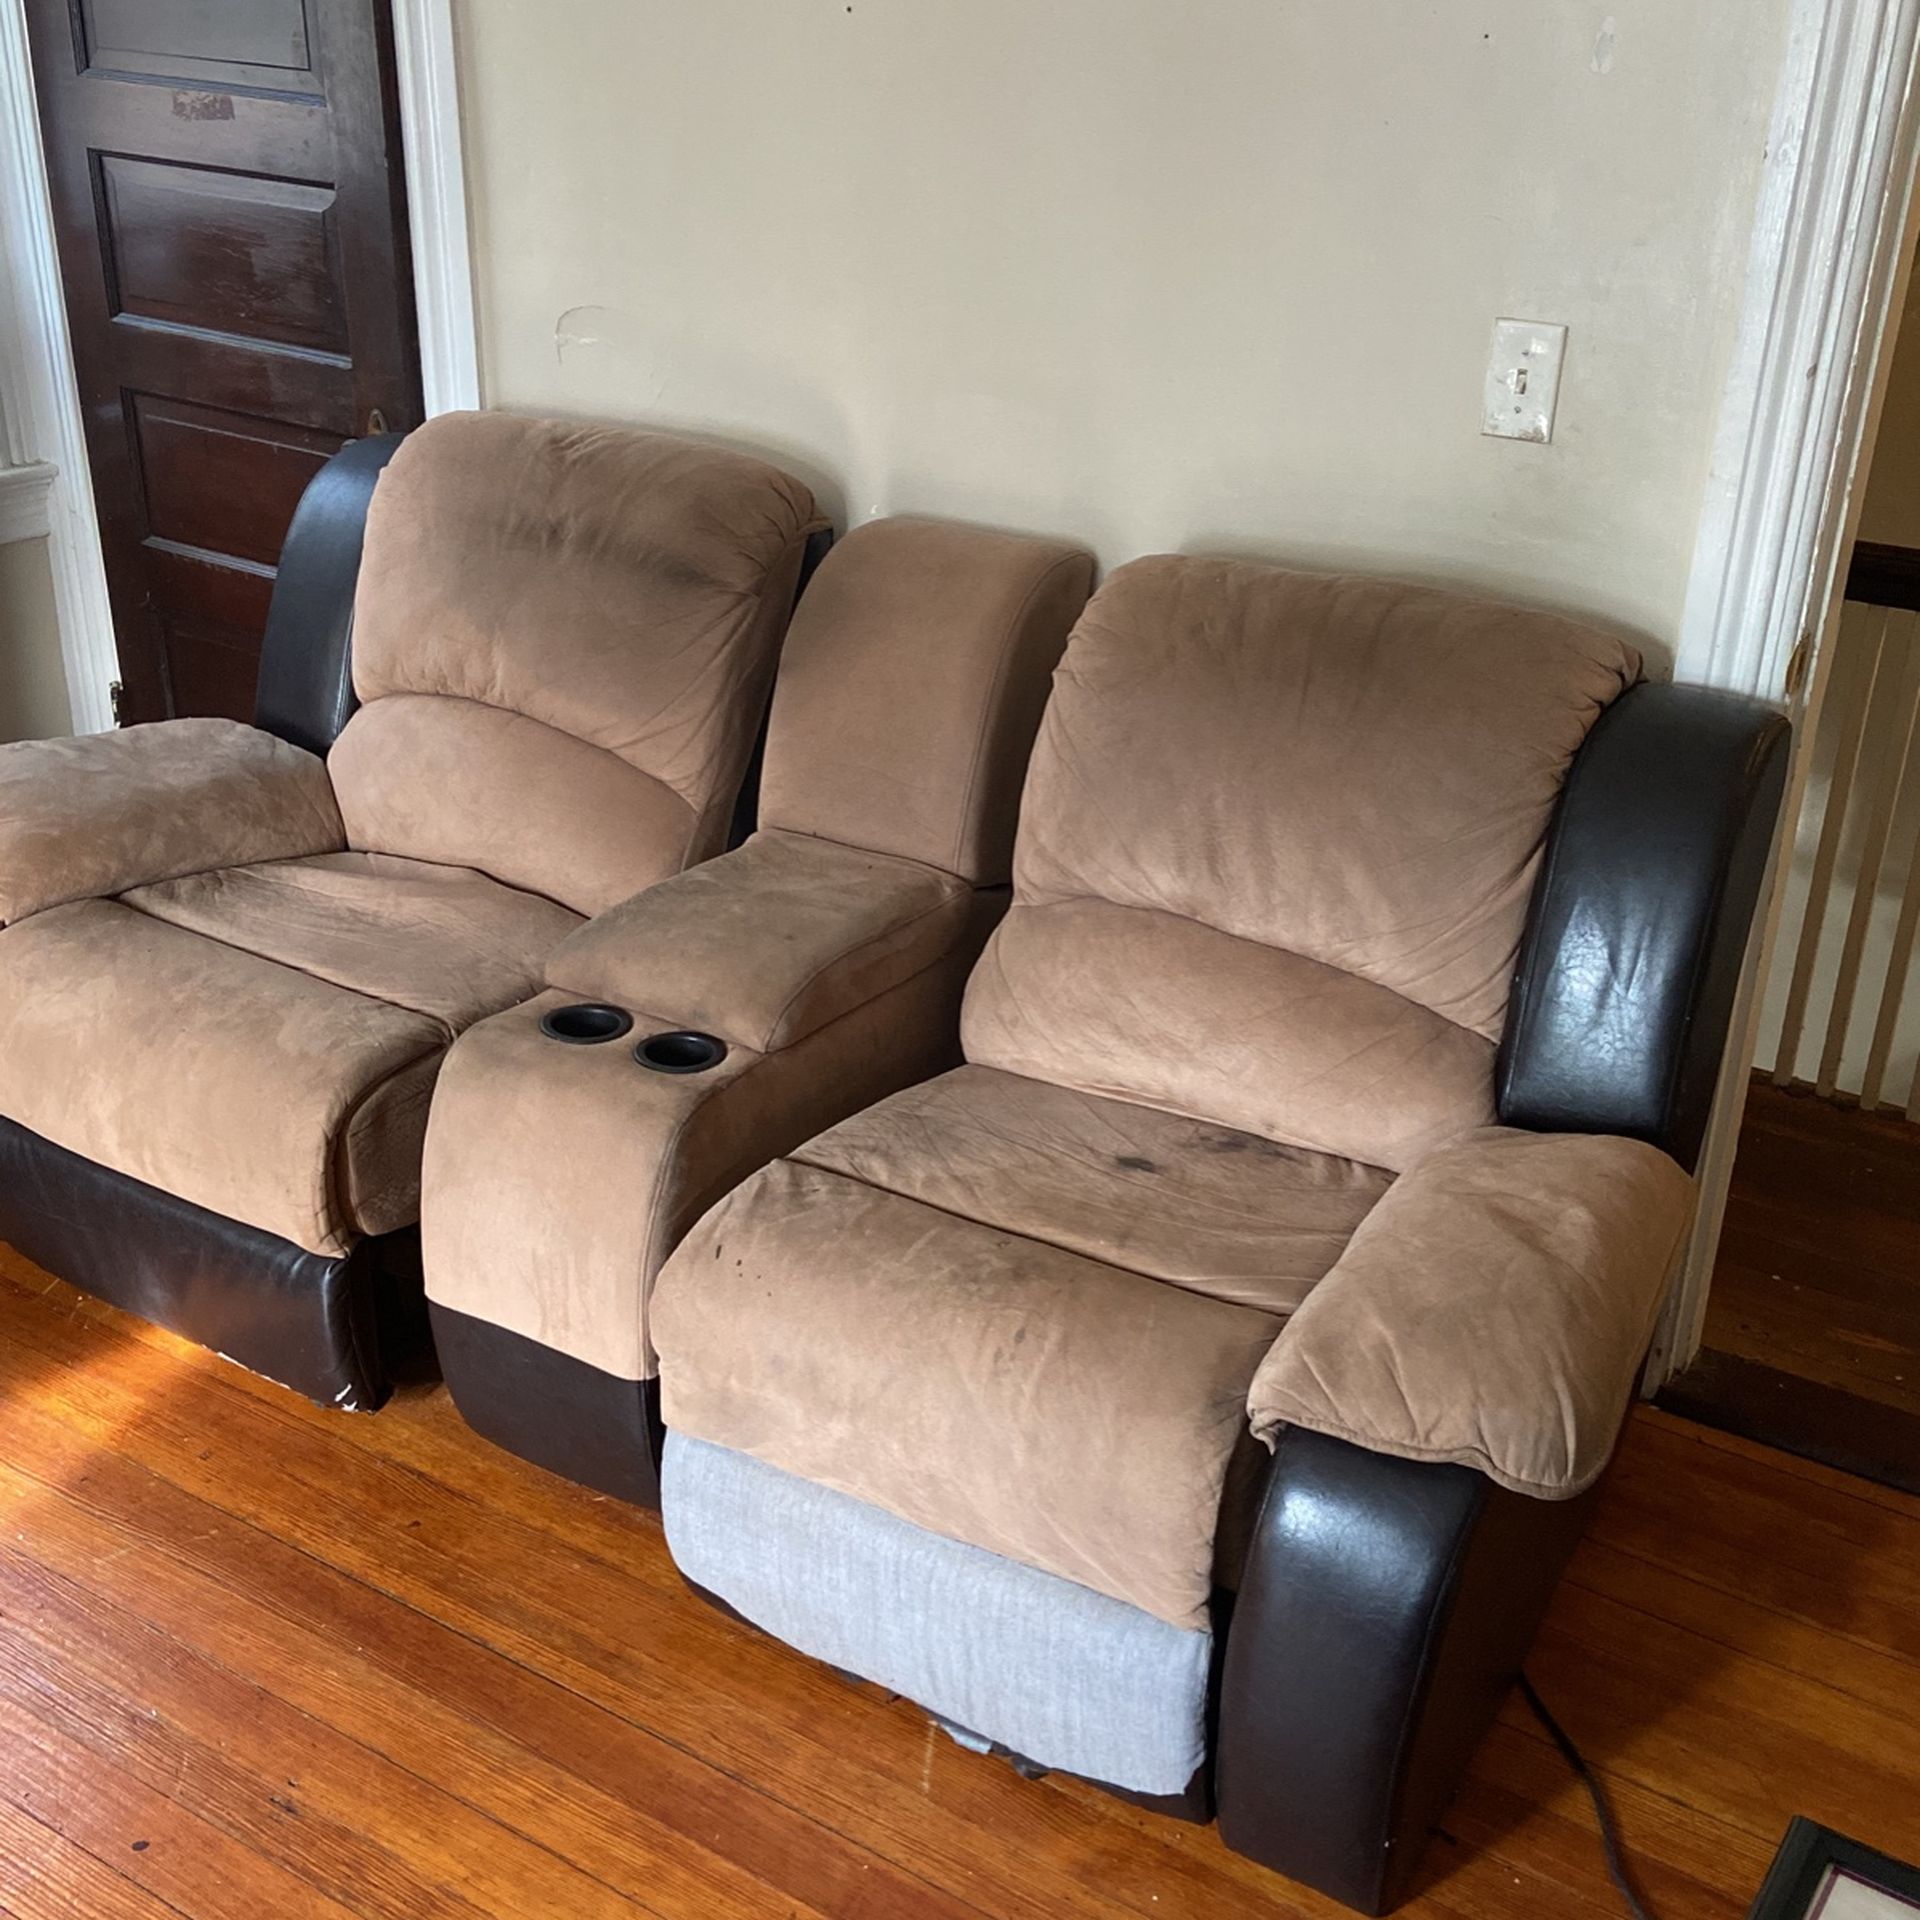 Recliner Love Seats With Cup Holders